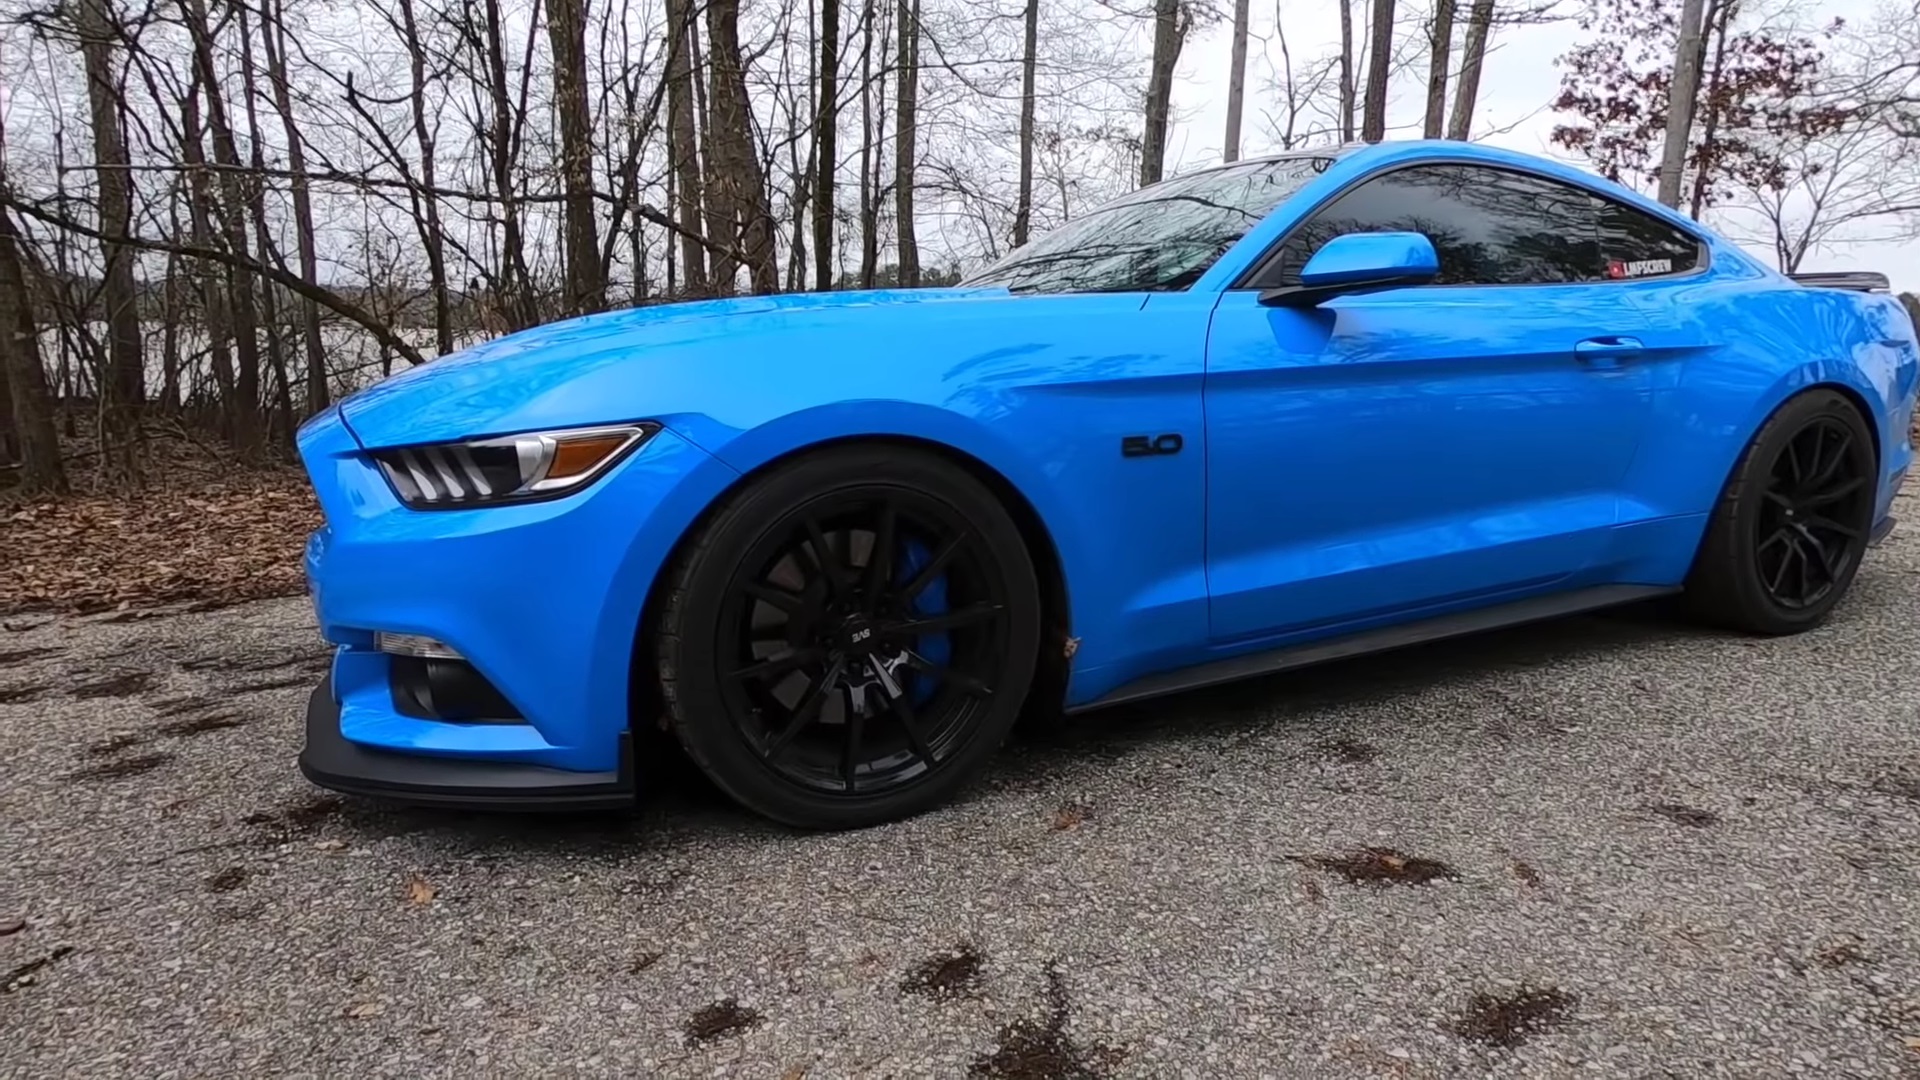 Video: 2-Year Ownership 2017 Ford Mustang Review